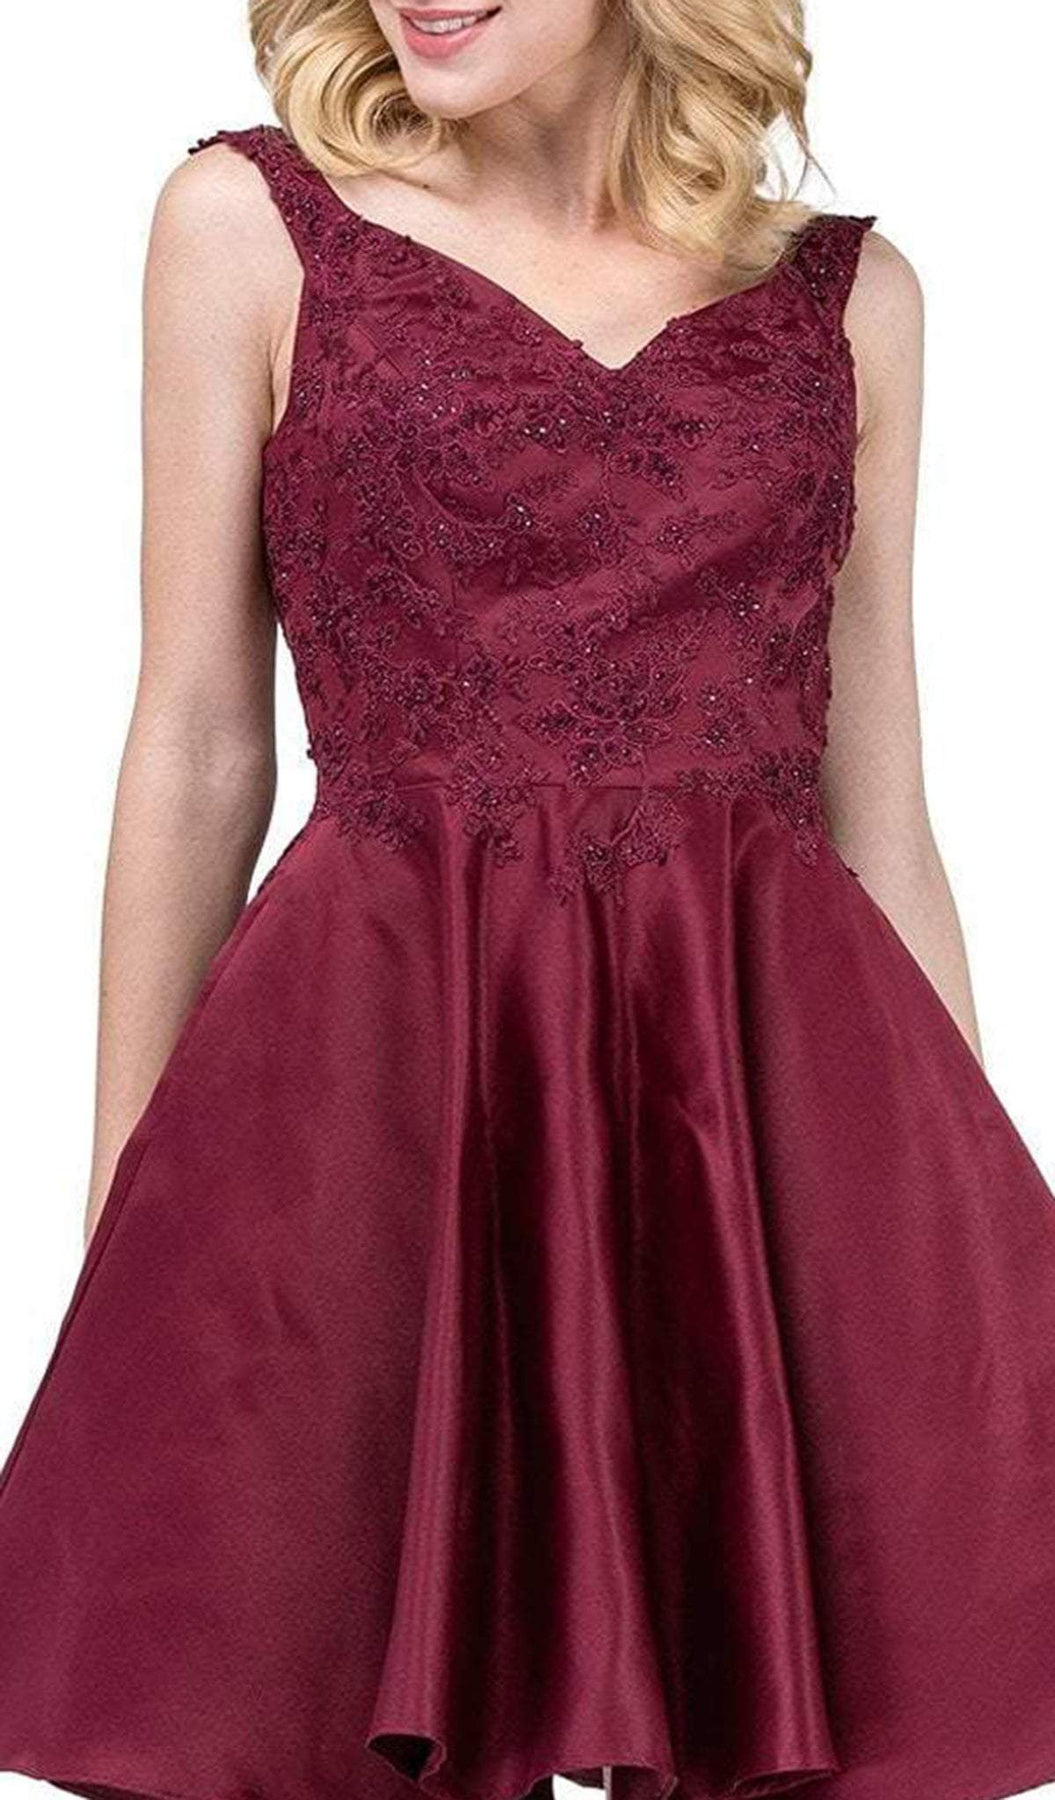 Dancing Queen - 3057 Beaded Lace Sweetheart A-line Homecoming Dress In Red